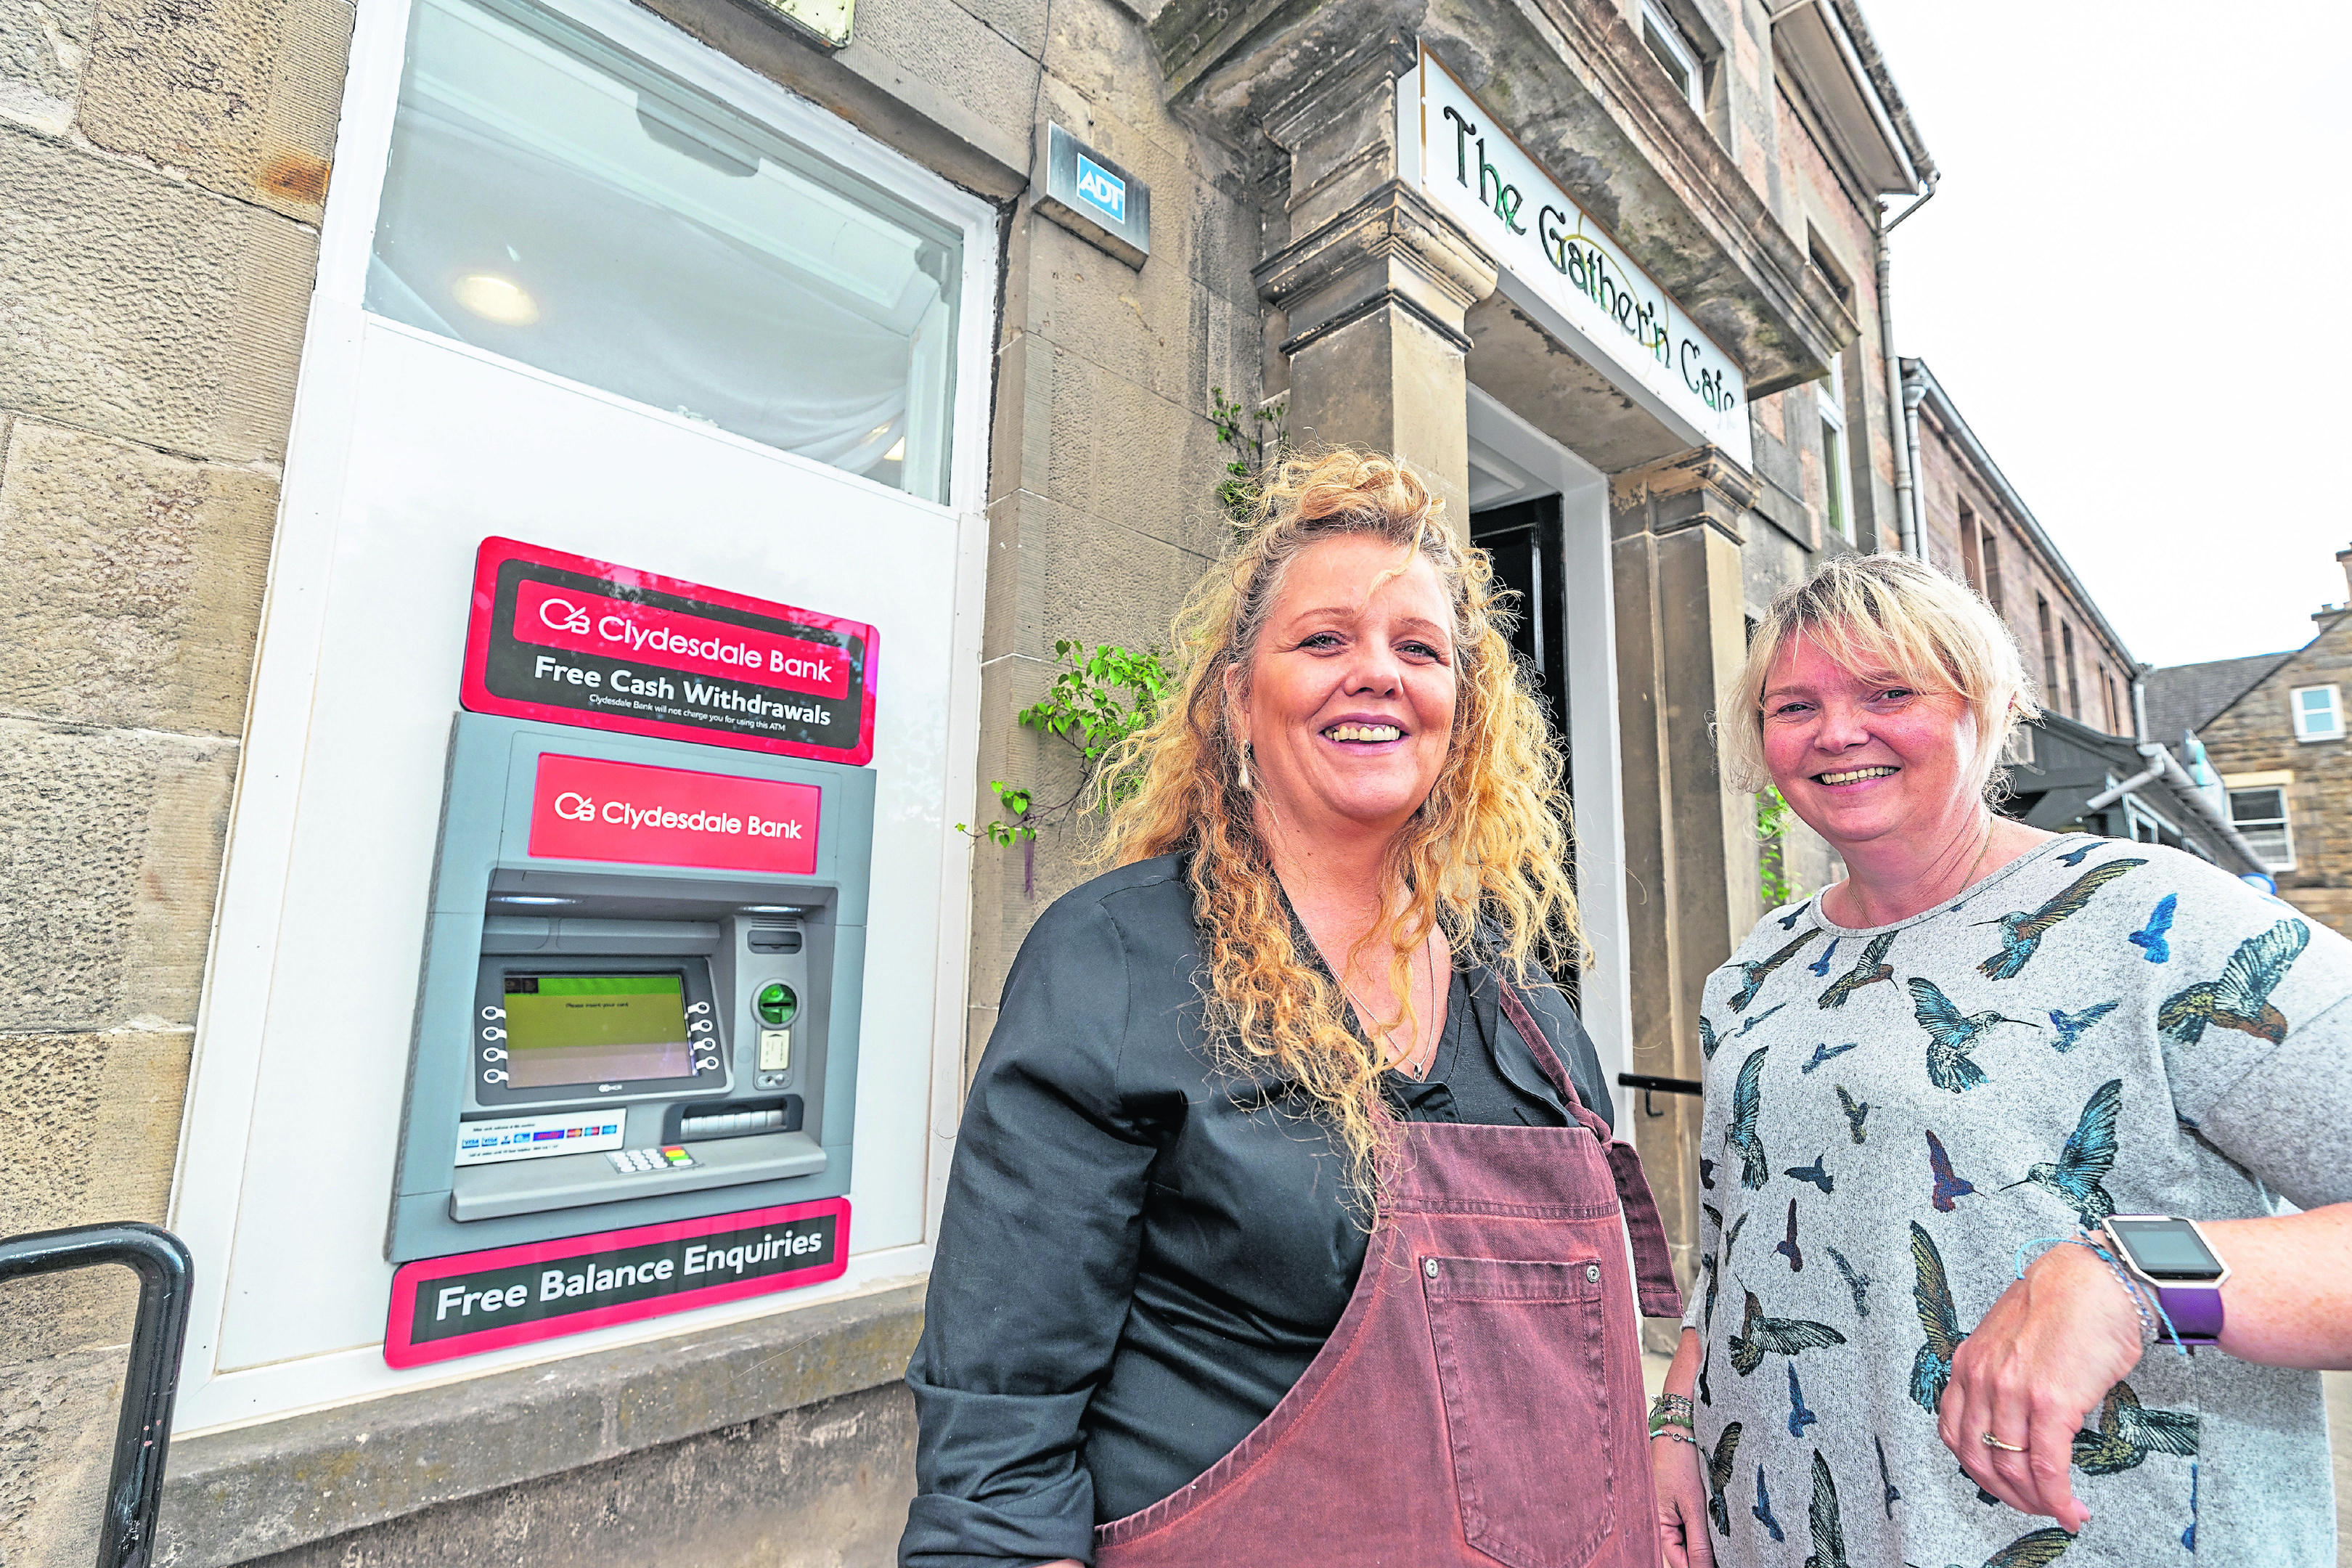 The cash machine has now reopened after Sarah Nairn-Anderson called out for its return